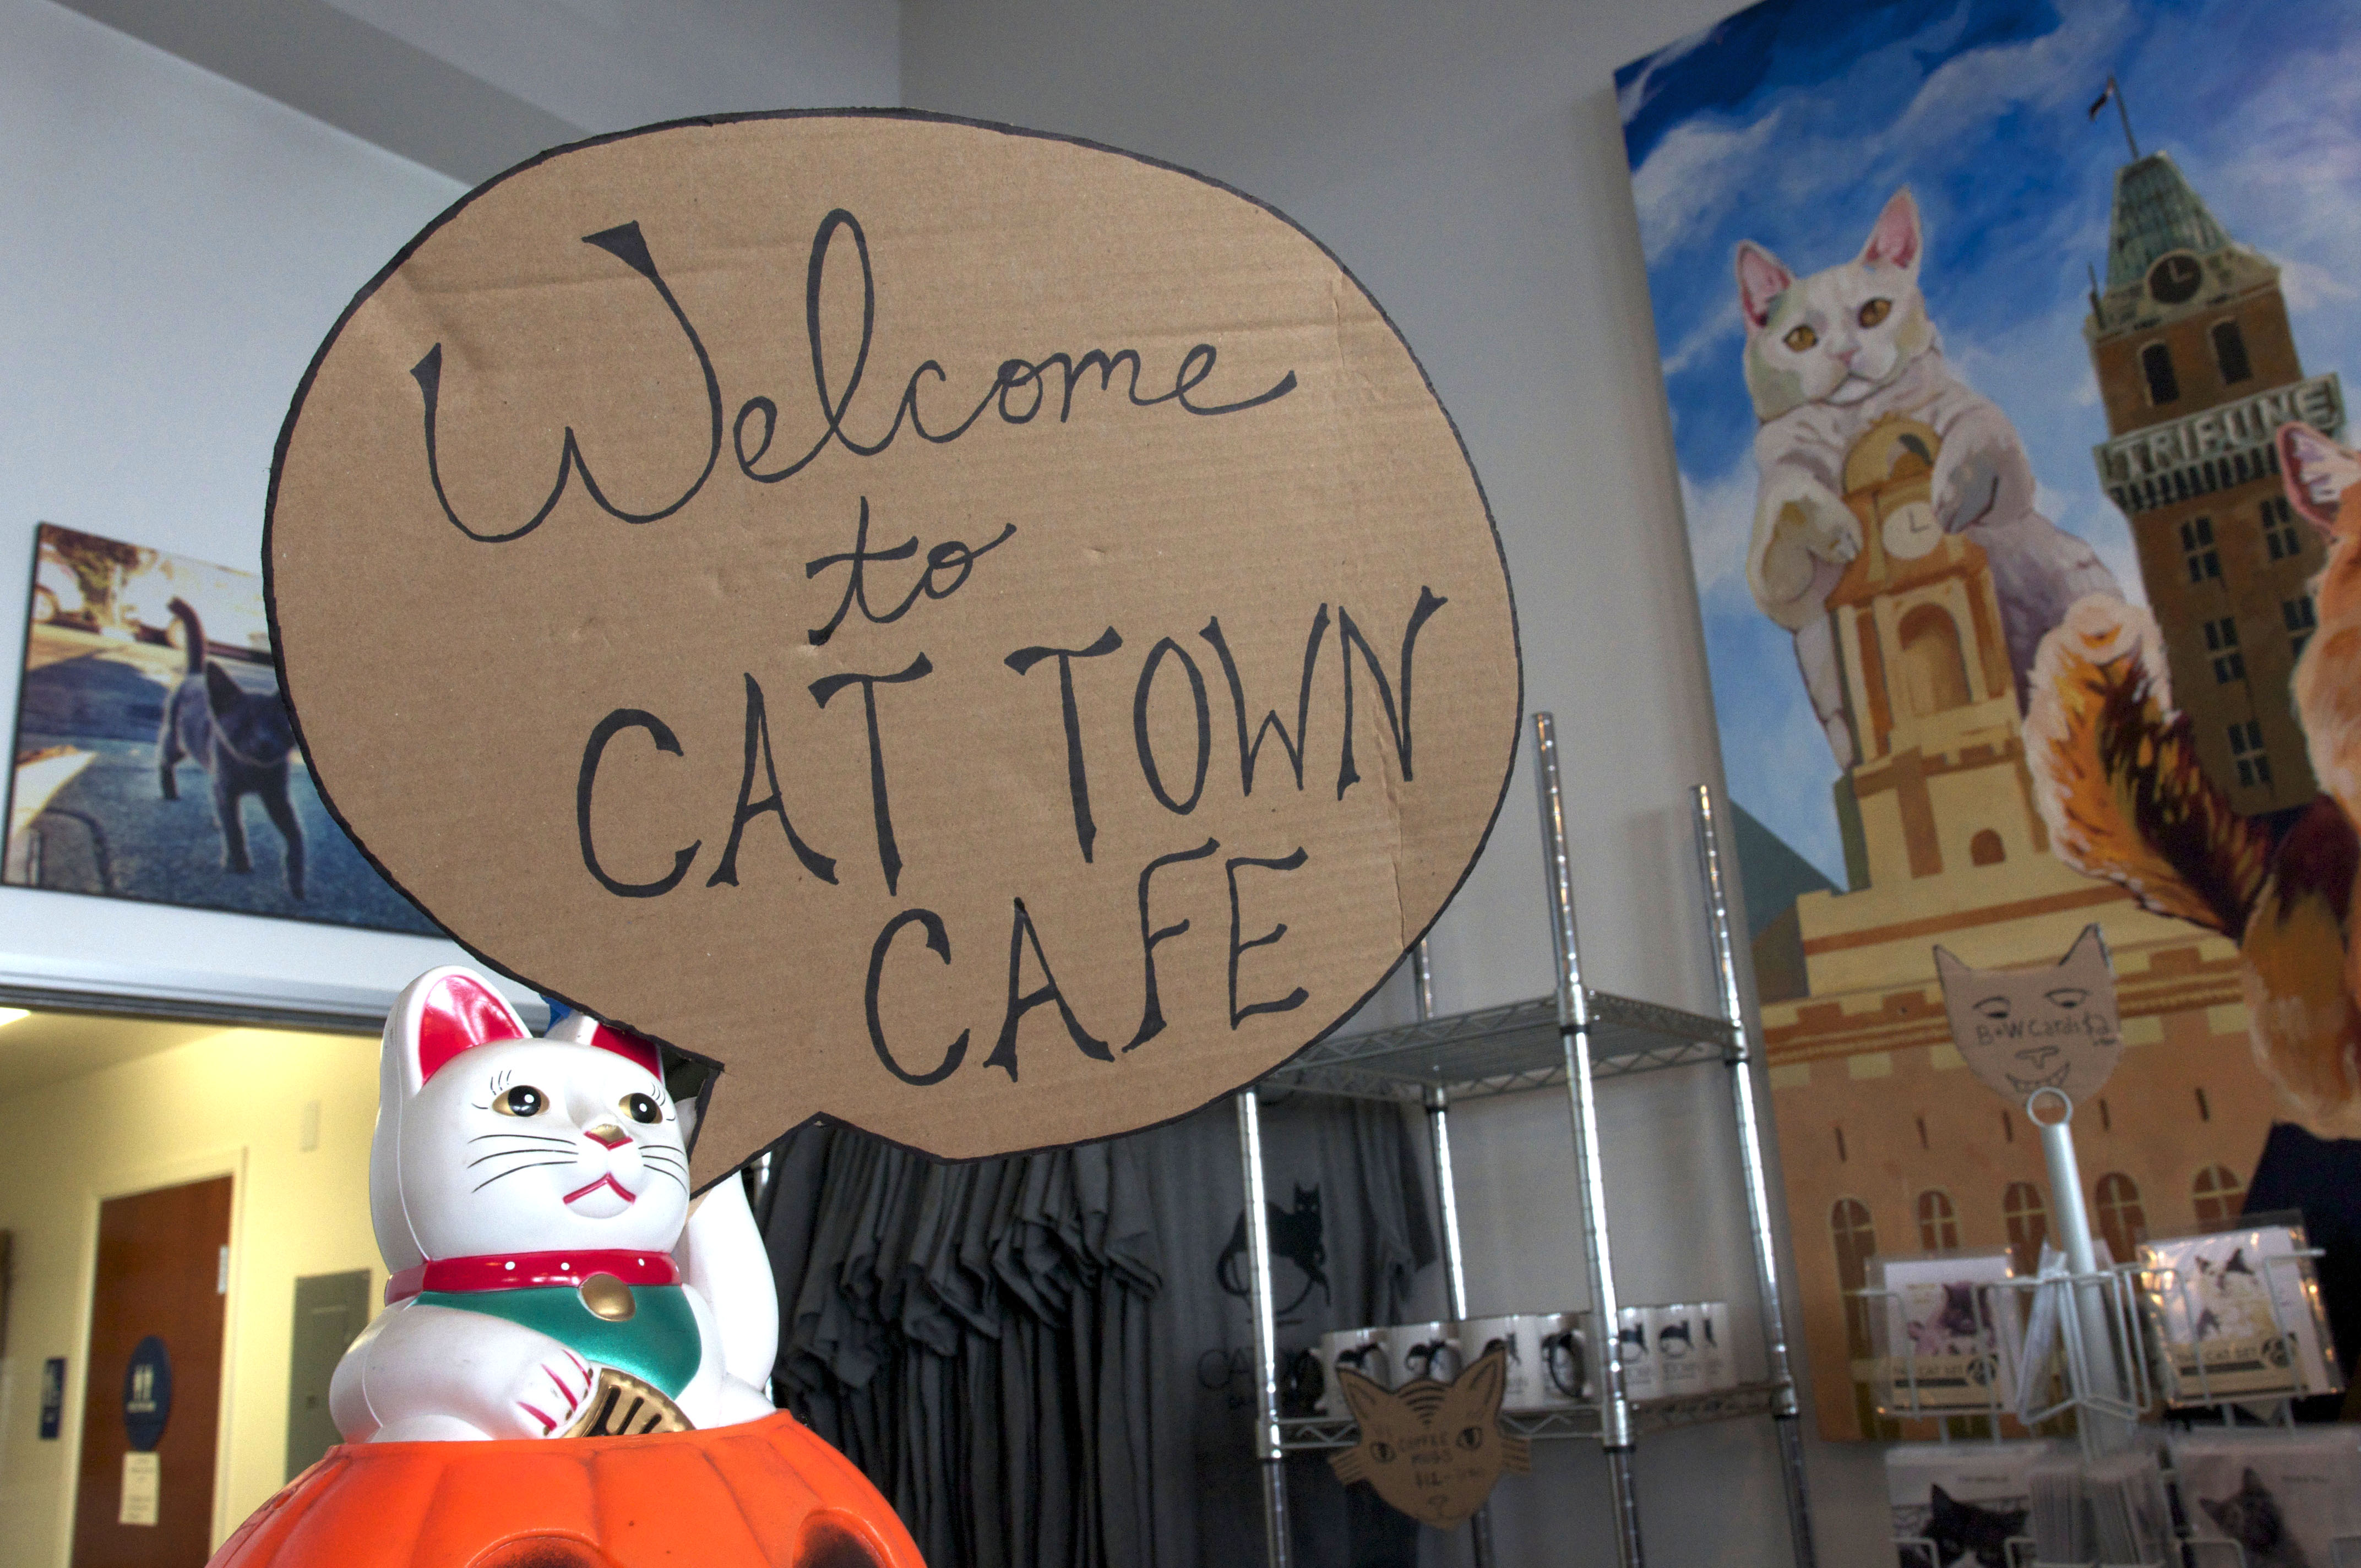 Cat Town Café, nation’s first cat café opens, matchmaking cats and cat